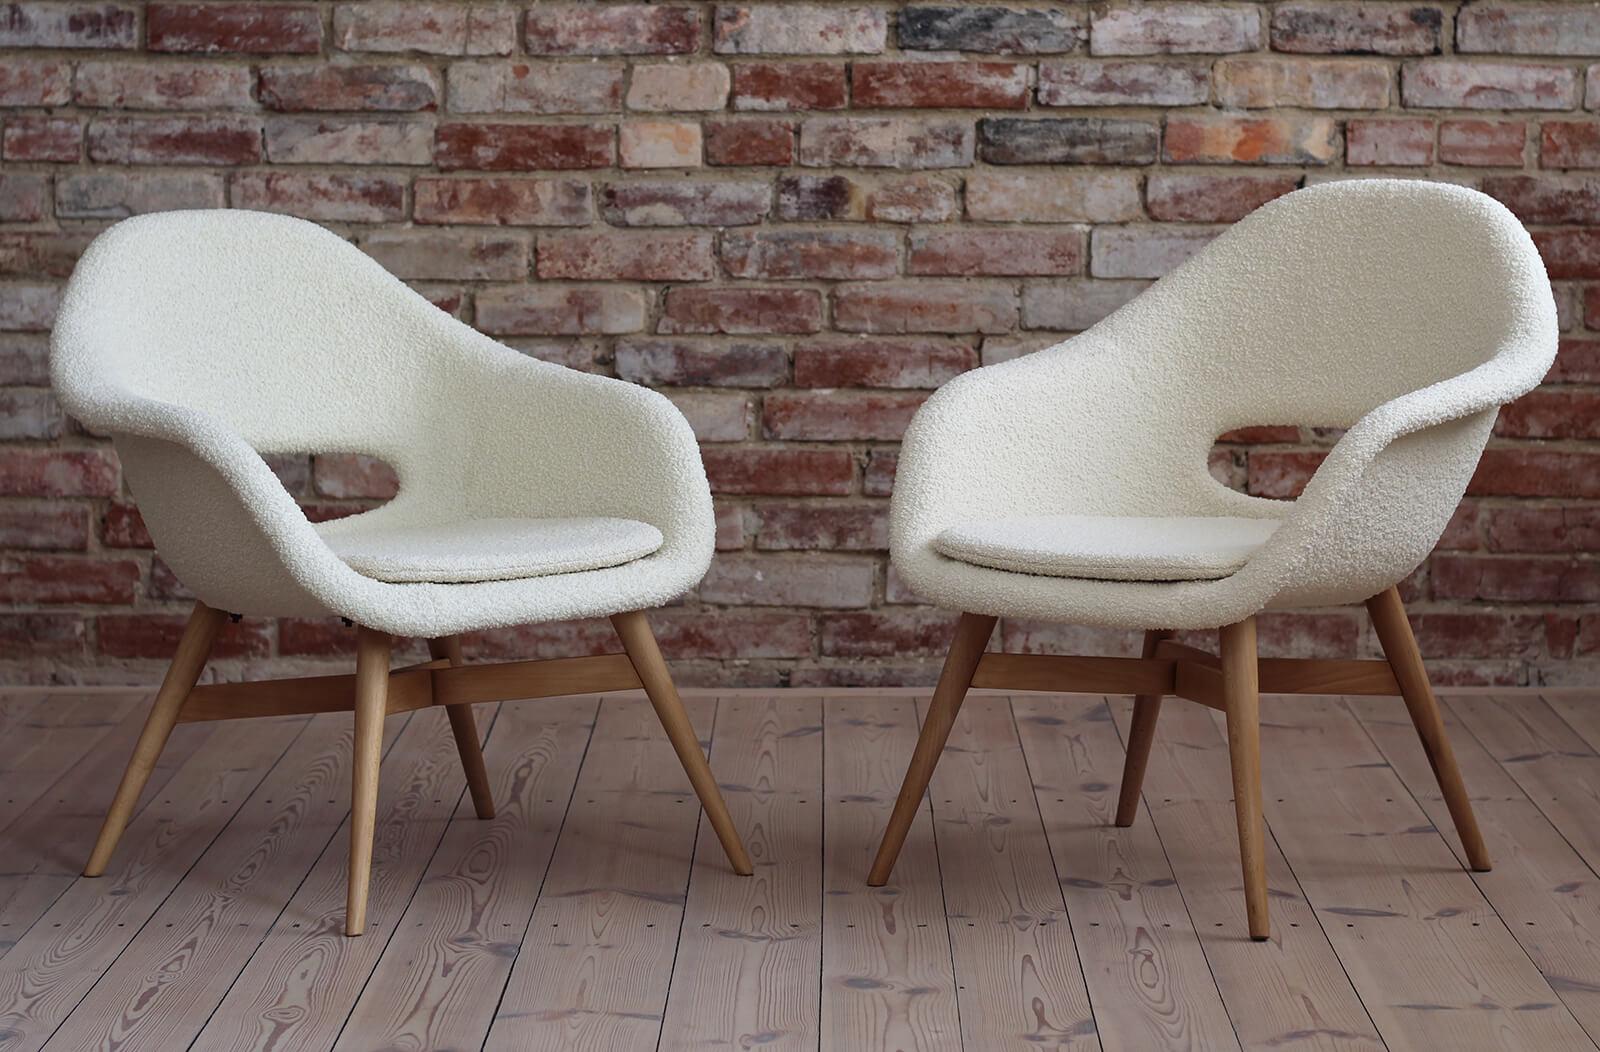 This Set of 2 Lounge Chairs was originally designed by the renowned Miroslav Navrátil in the 1950s, hailing from the Czech Republic. The seating shell is made of fiberglass and set on a wooden base. The whole piece was carefully restored - wooden